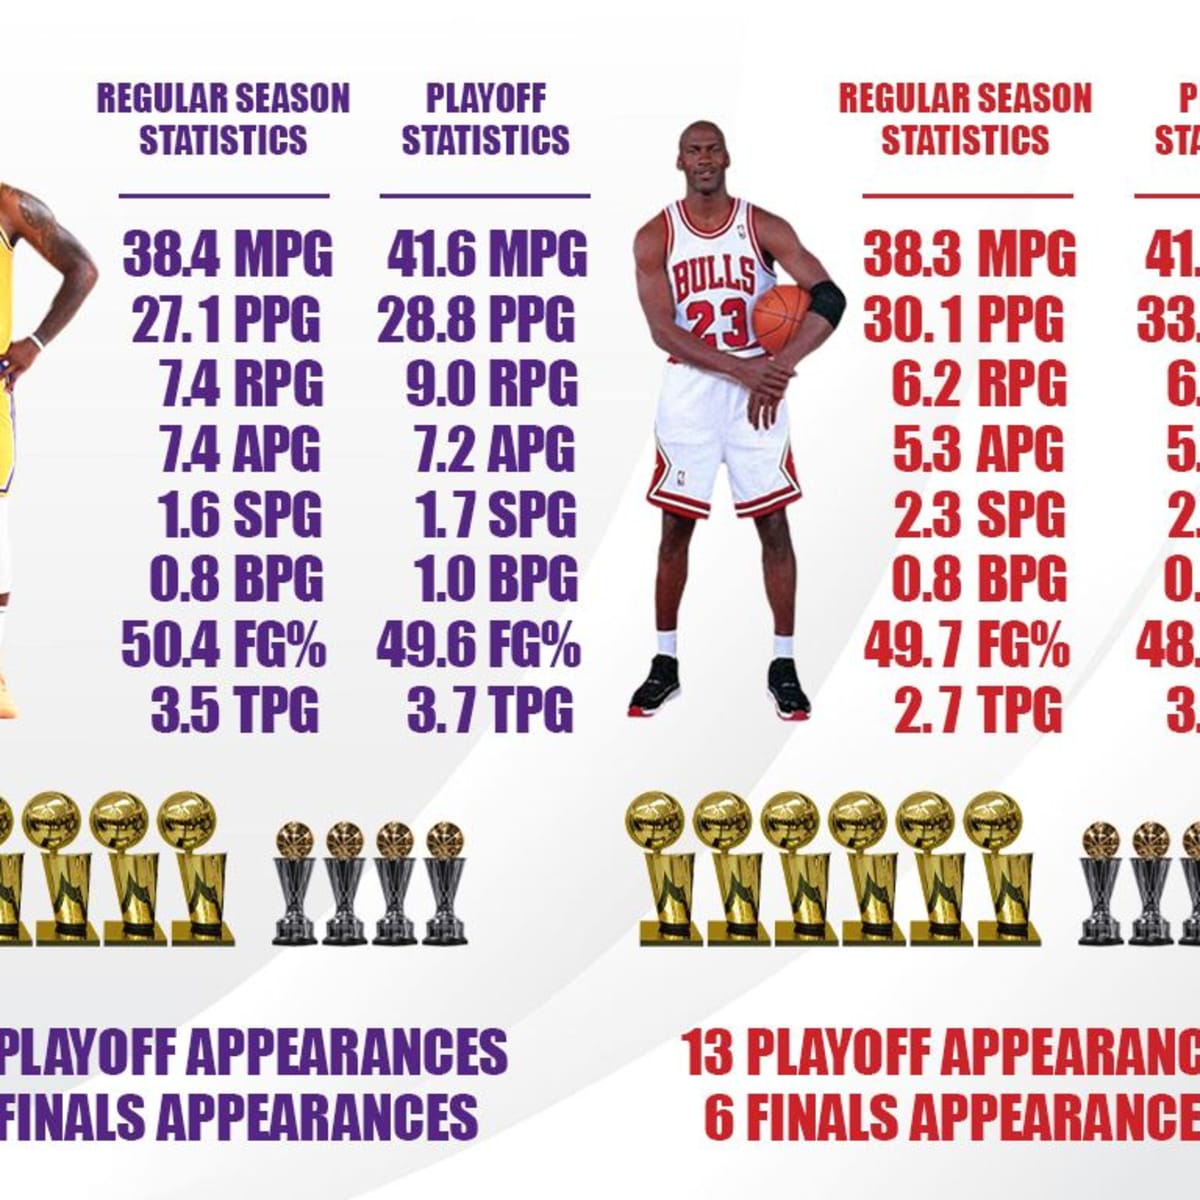 LeBron James: Career stats, records, awards and medals of US